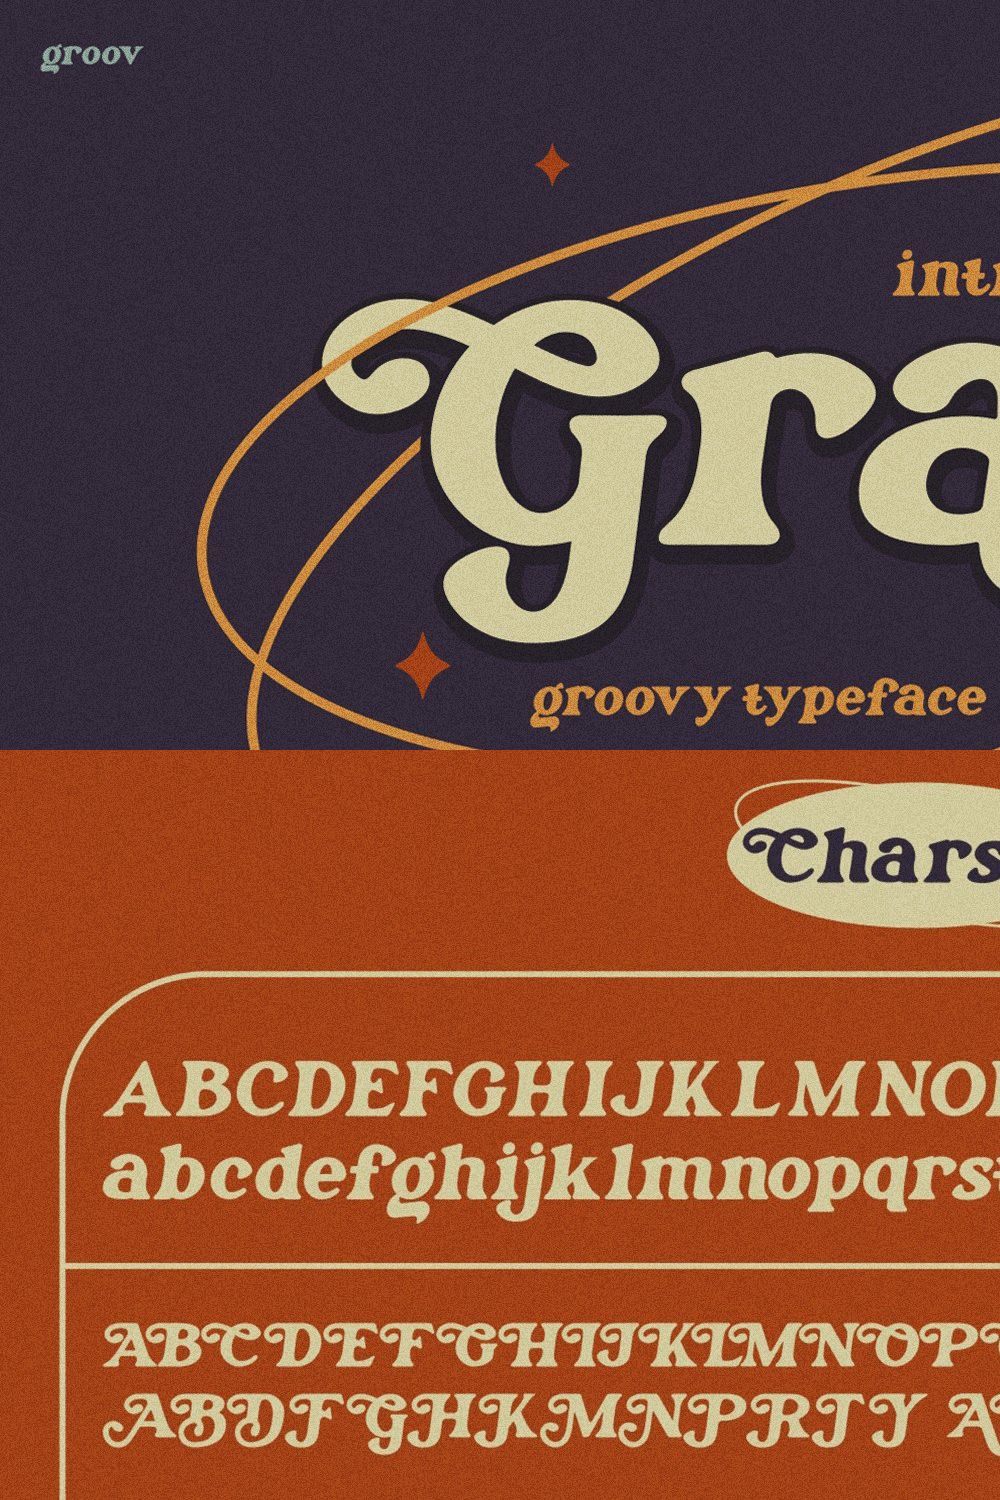 Gracy - Groovy Typeface pinterest preview image.